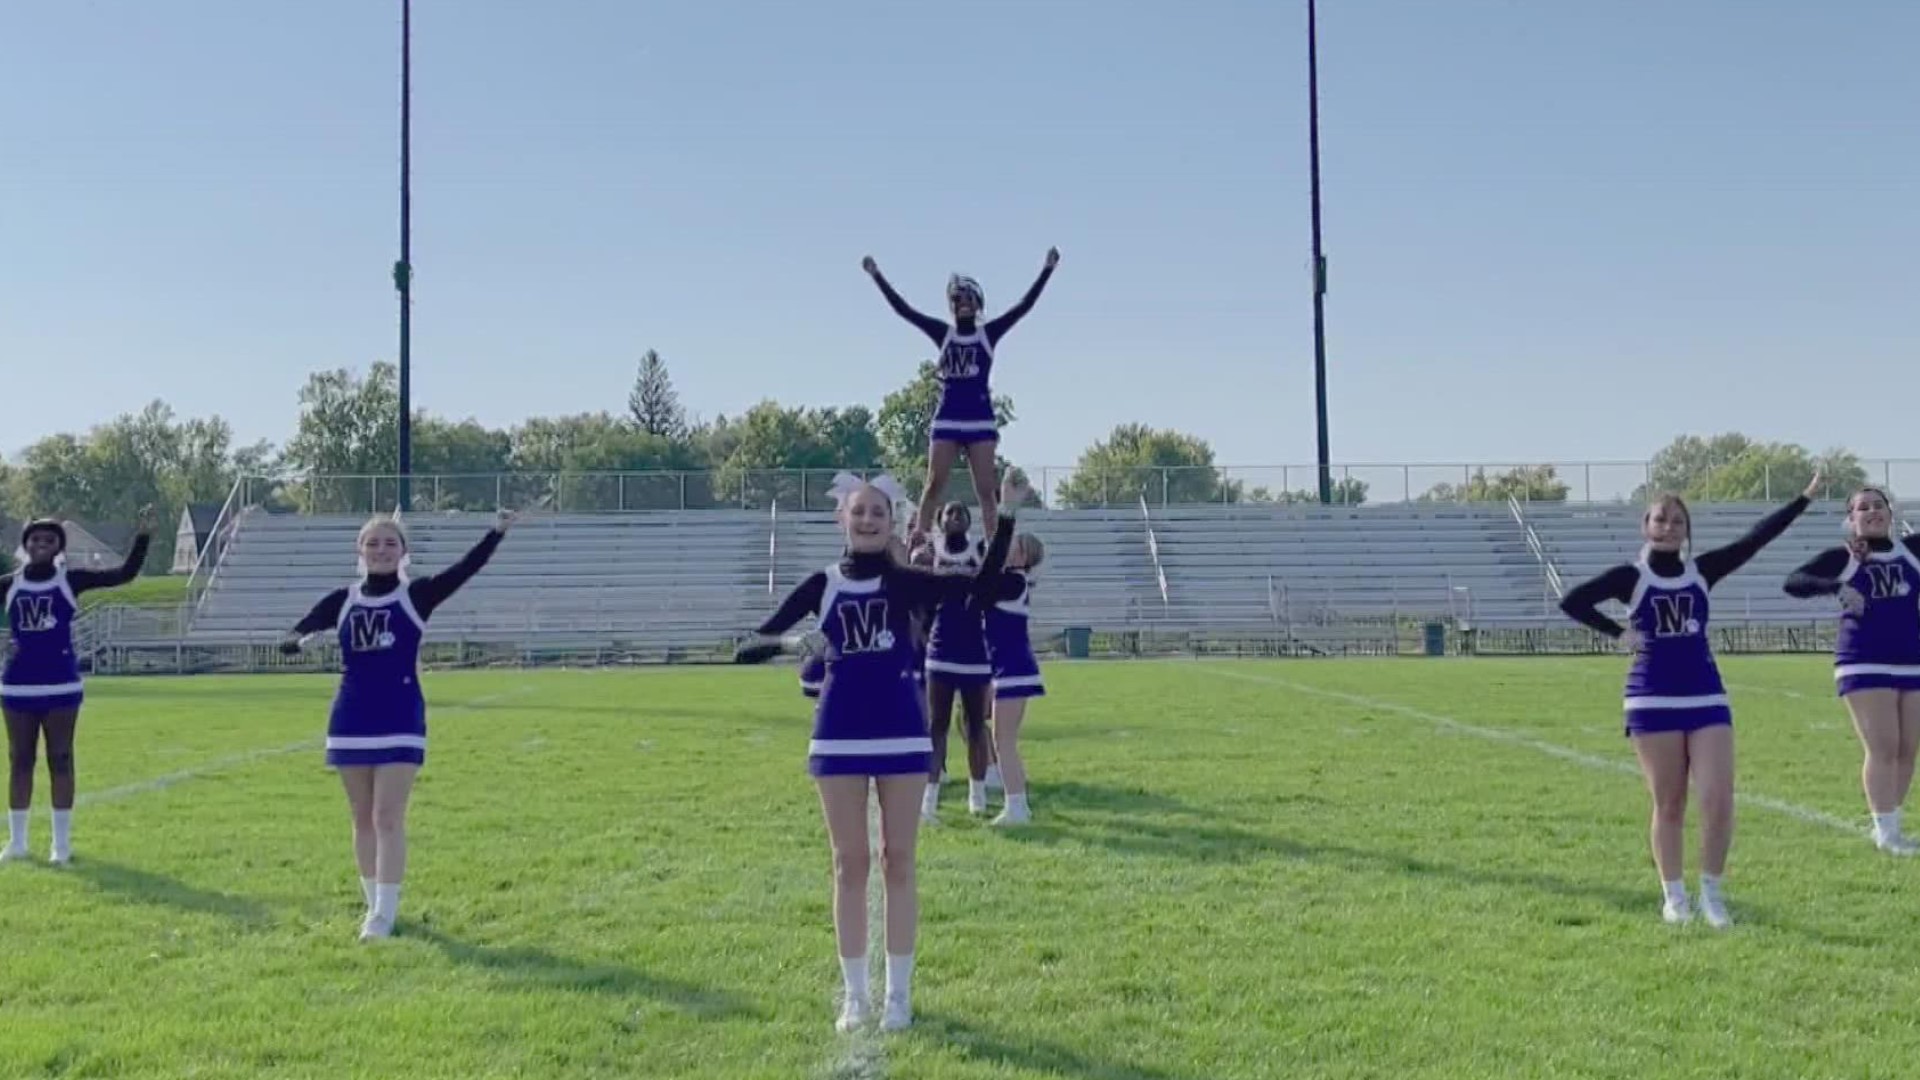 Friday's Operation Football Cheerleaders of the Week are from Muncie Central High School.